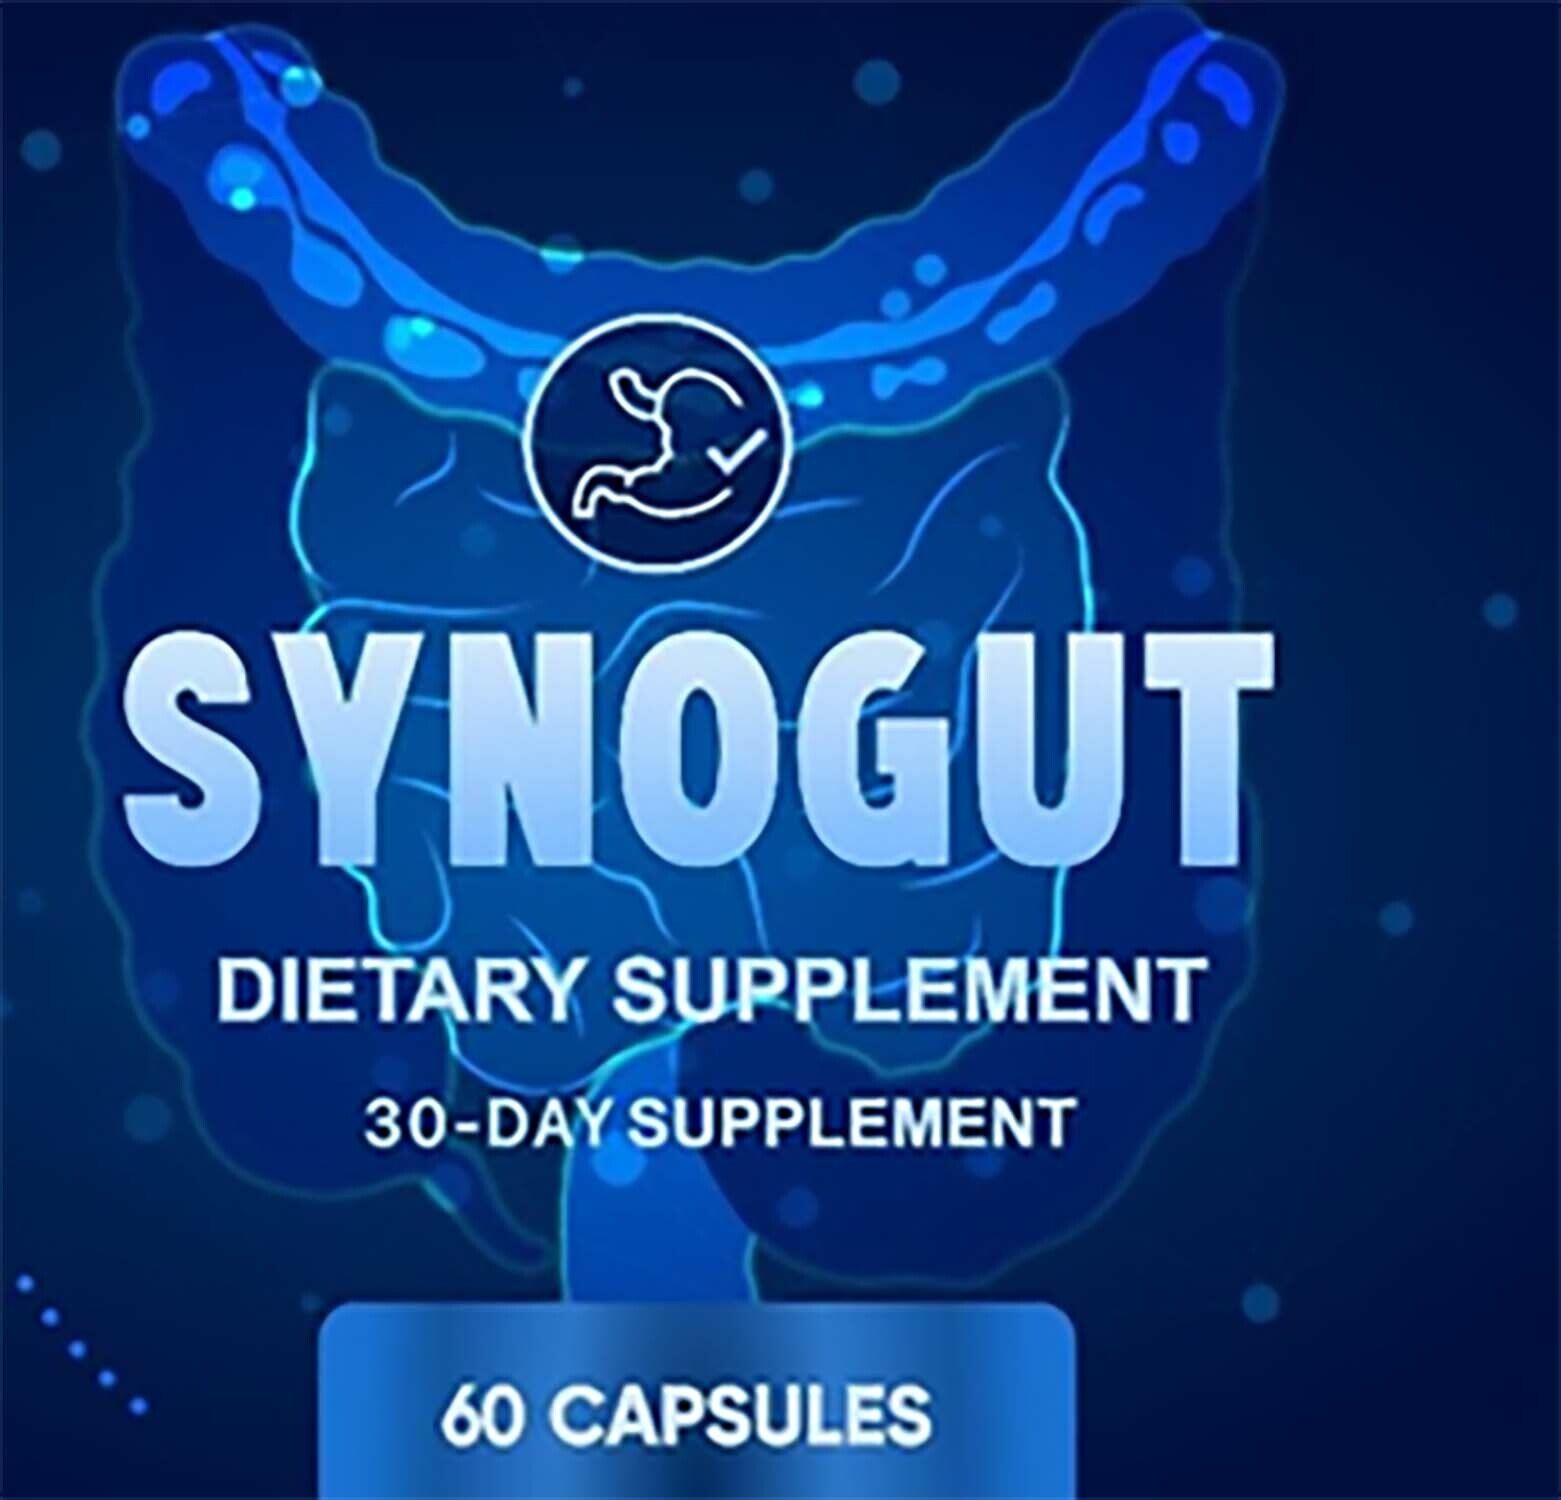 is synogut fda approved